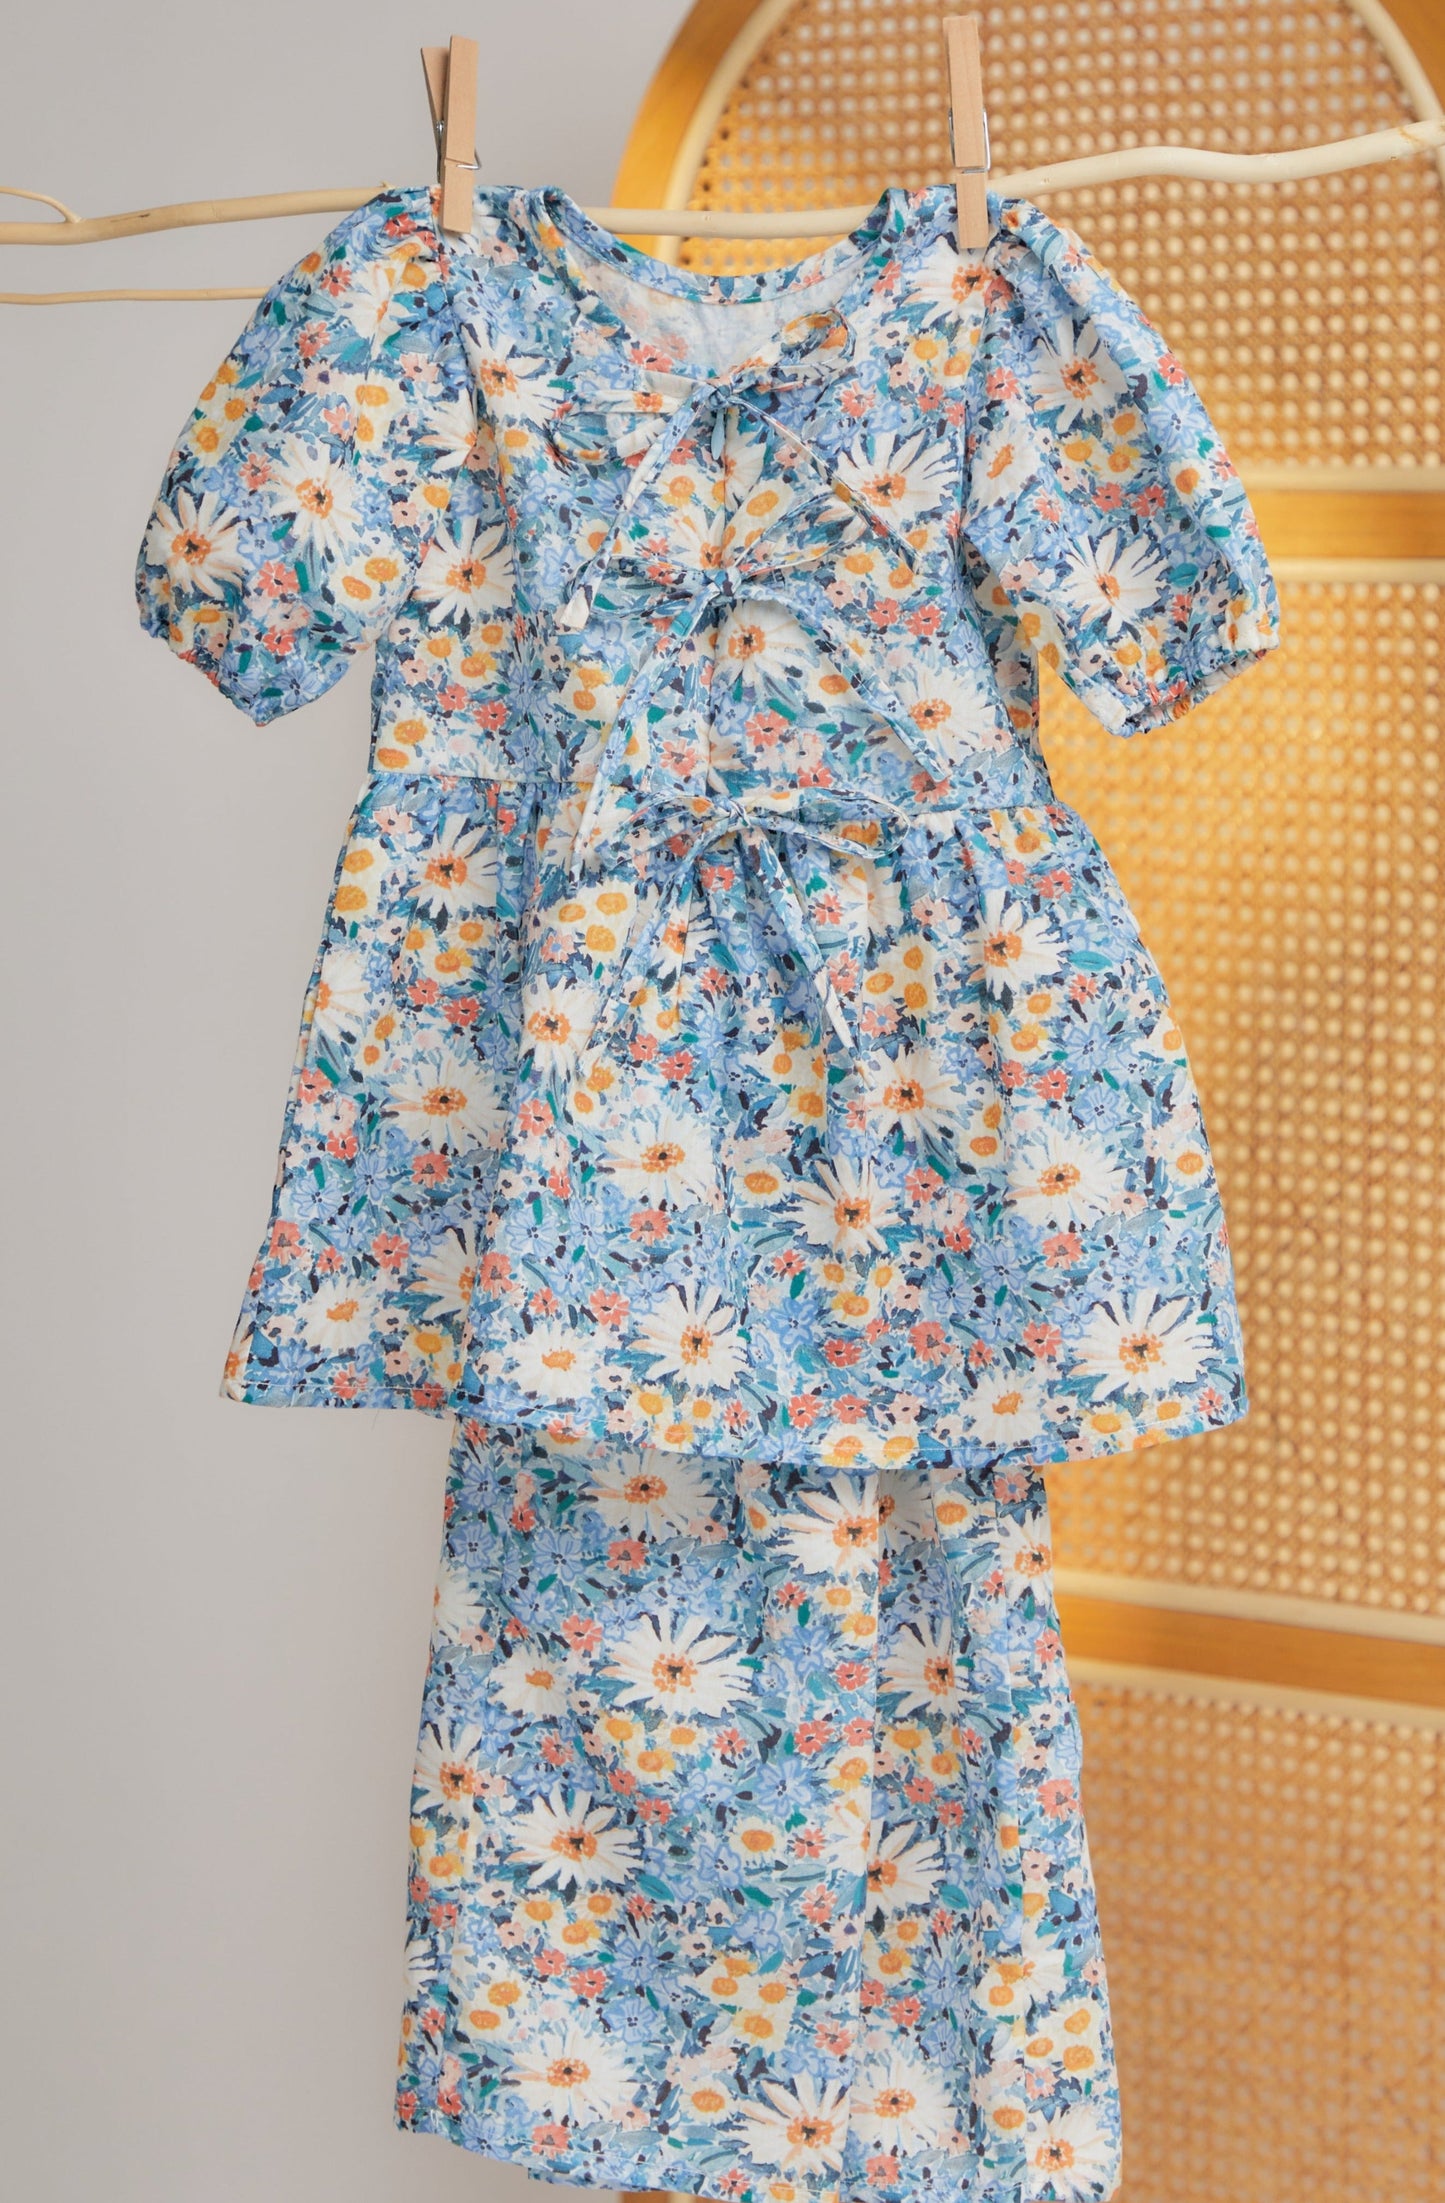 Kids - Bow Cotton Set in Spring Daisies